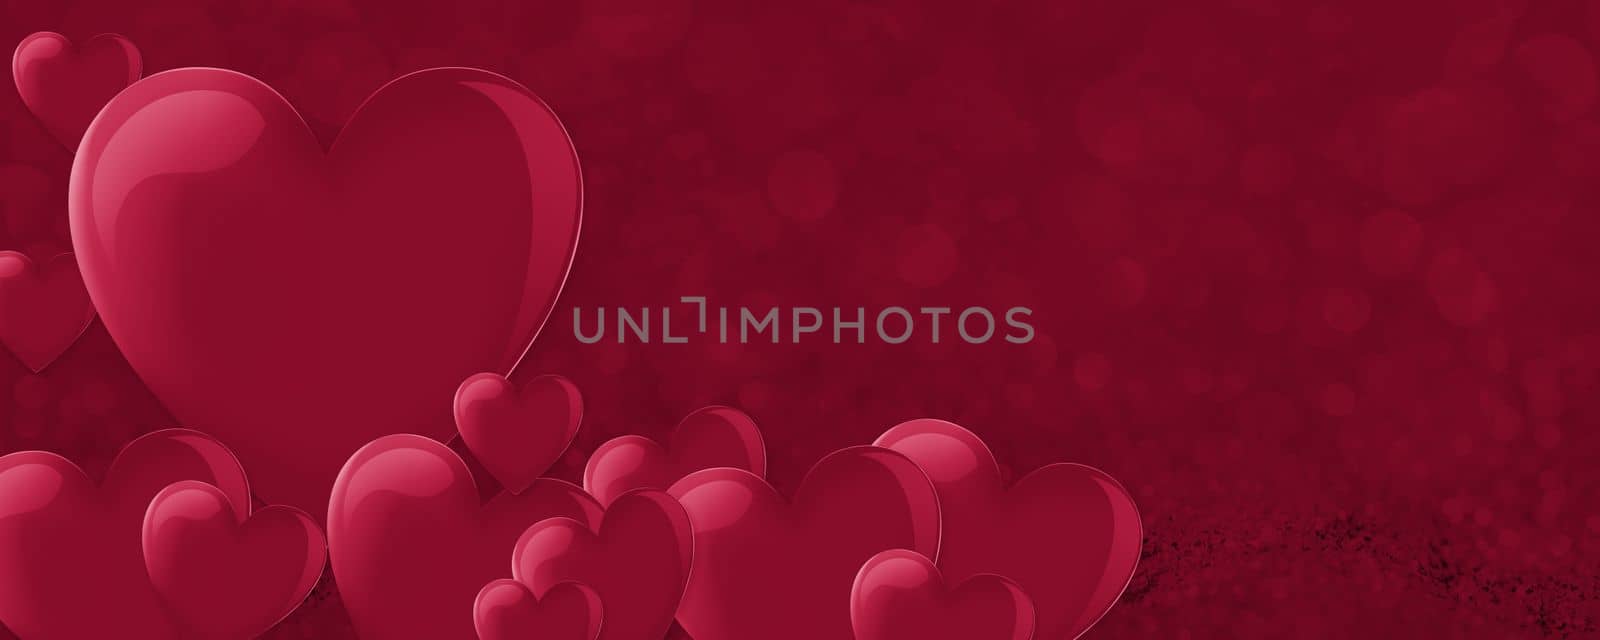 Valentine's Day. Background with heart template. Wallpapers, flyers, invitations, posters, brochures, banners.  by Alina_Lebed